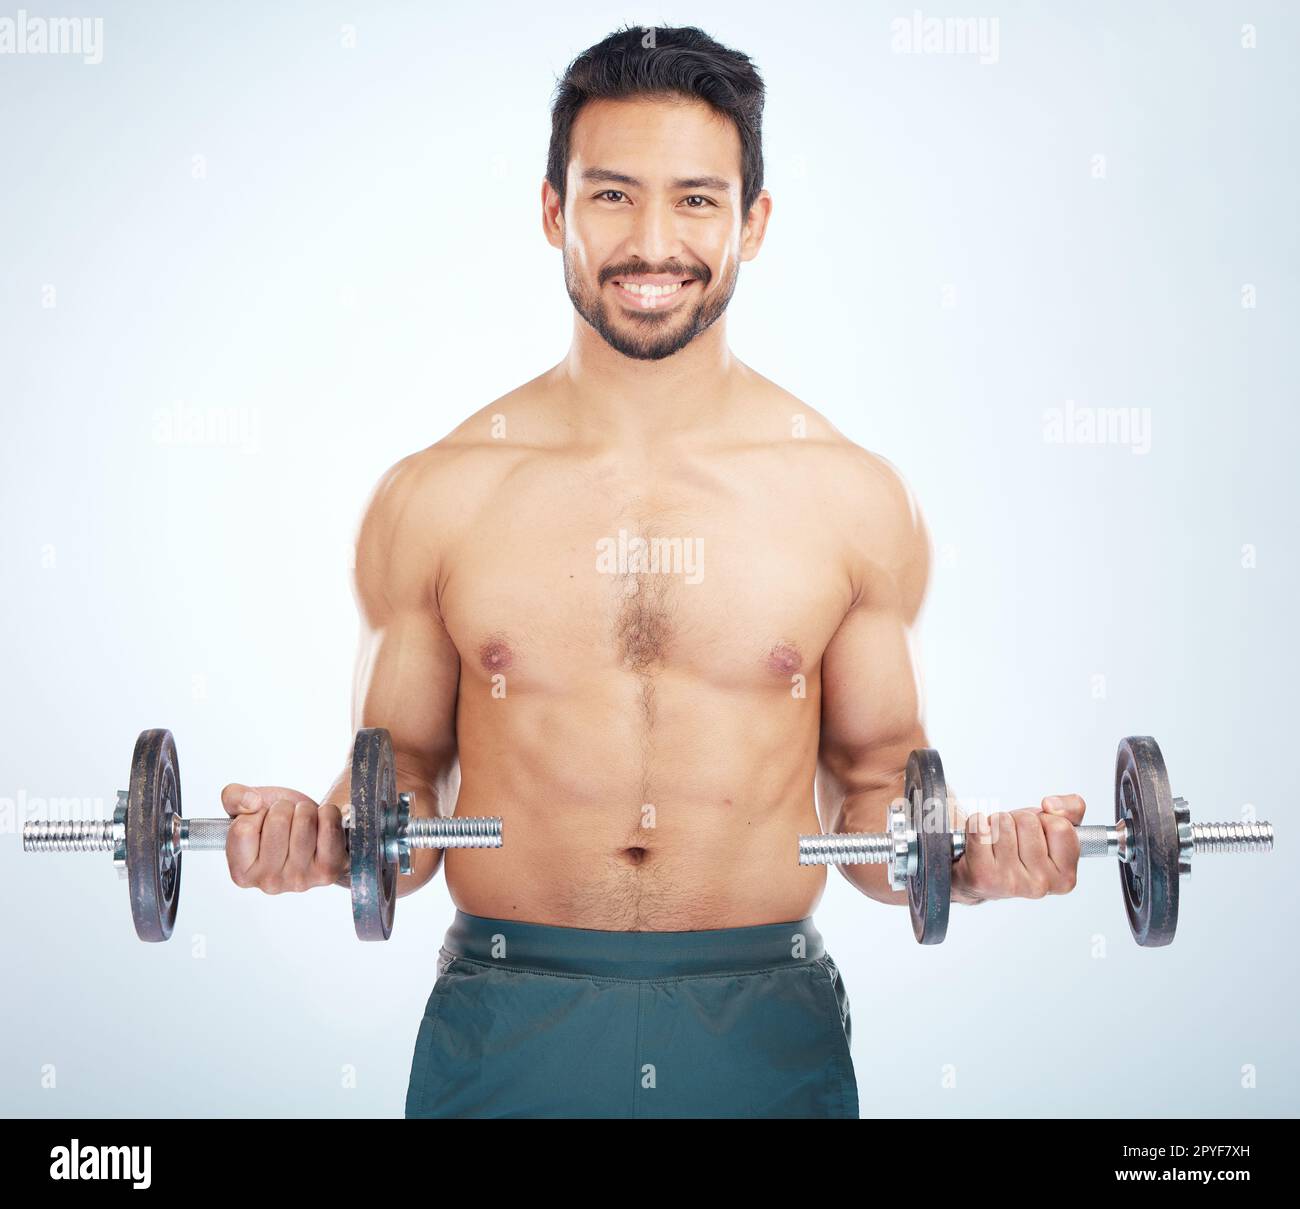 Portrait, fitness or man training with dumbbell in workout or exercise in studio for strong arms, biceps or body goals. Muscles, mindset or happy bodybuilder sports athlete weightlifting with mock up Stock Photo